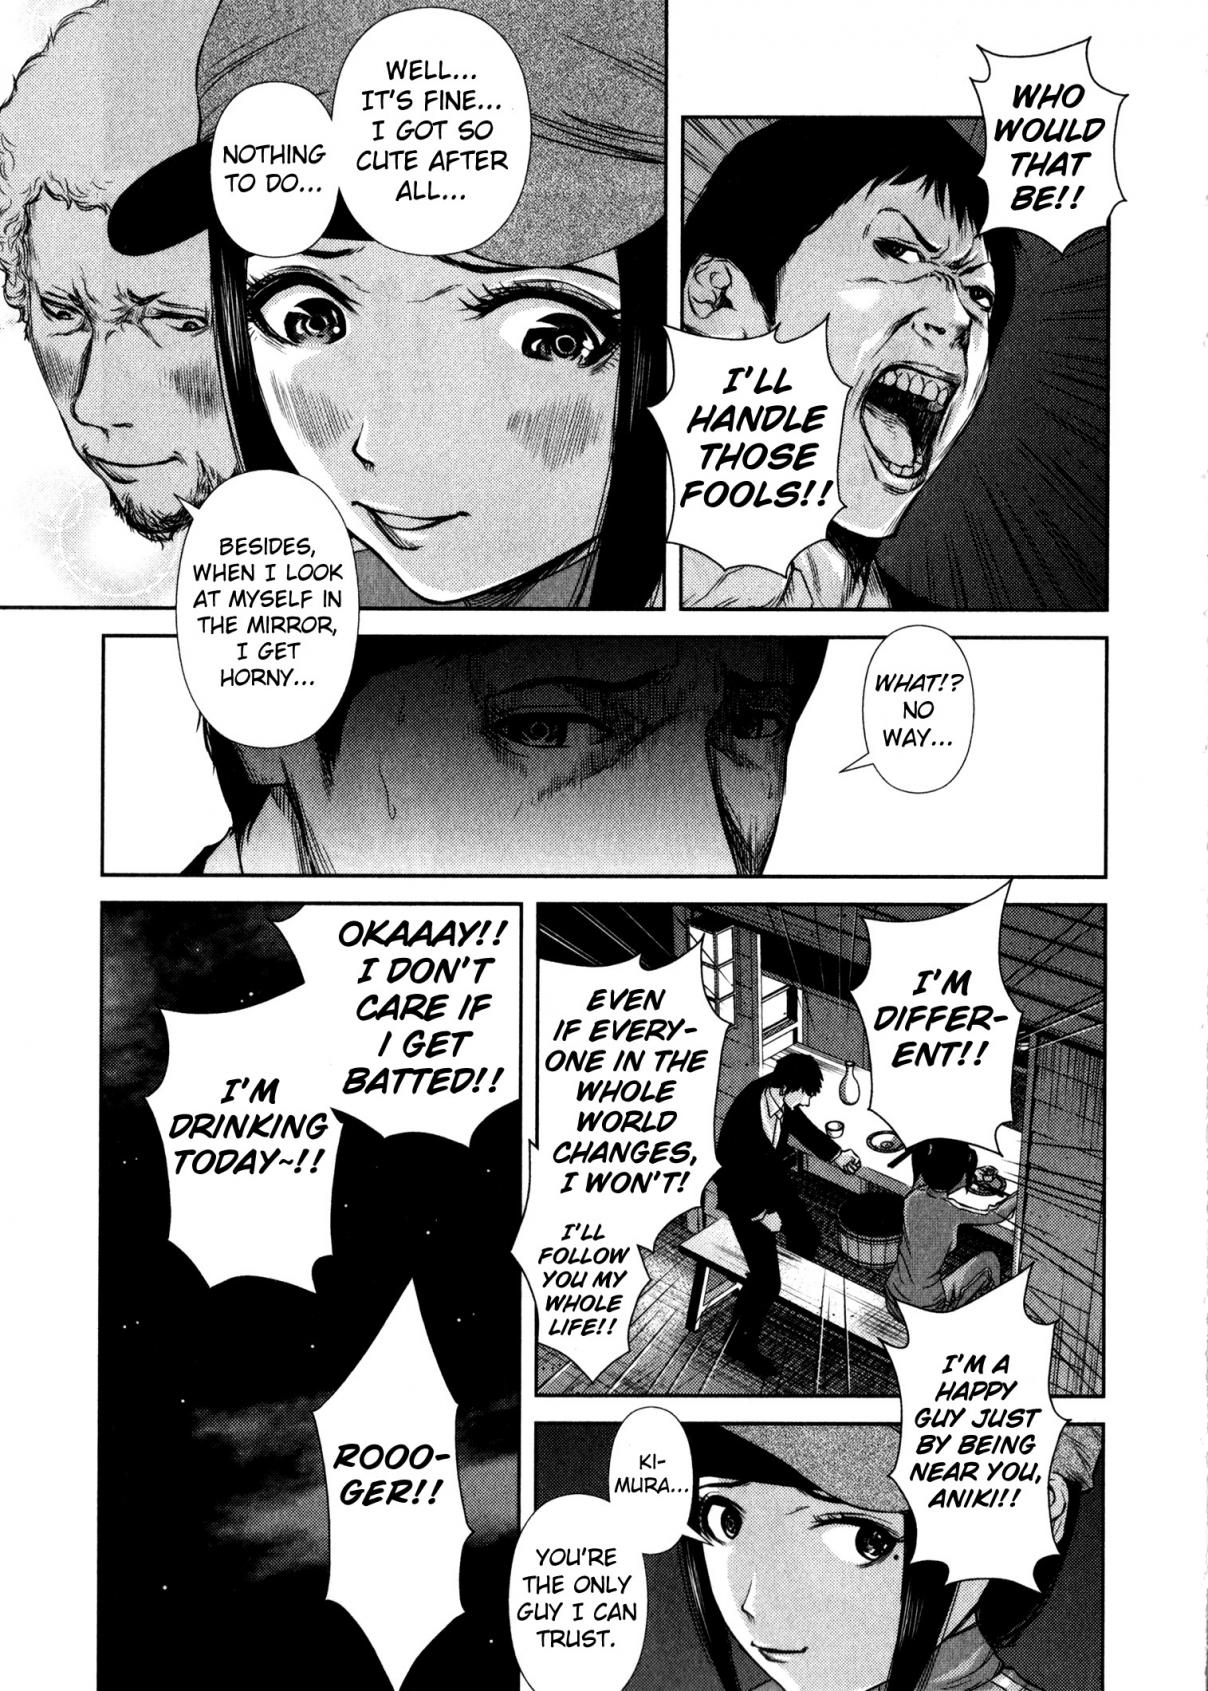 Back Street Girls Vol. 1 Ch. 7 Impossible